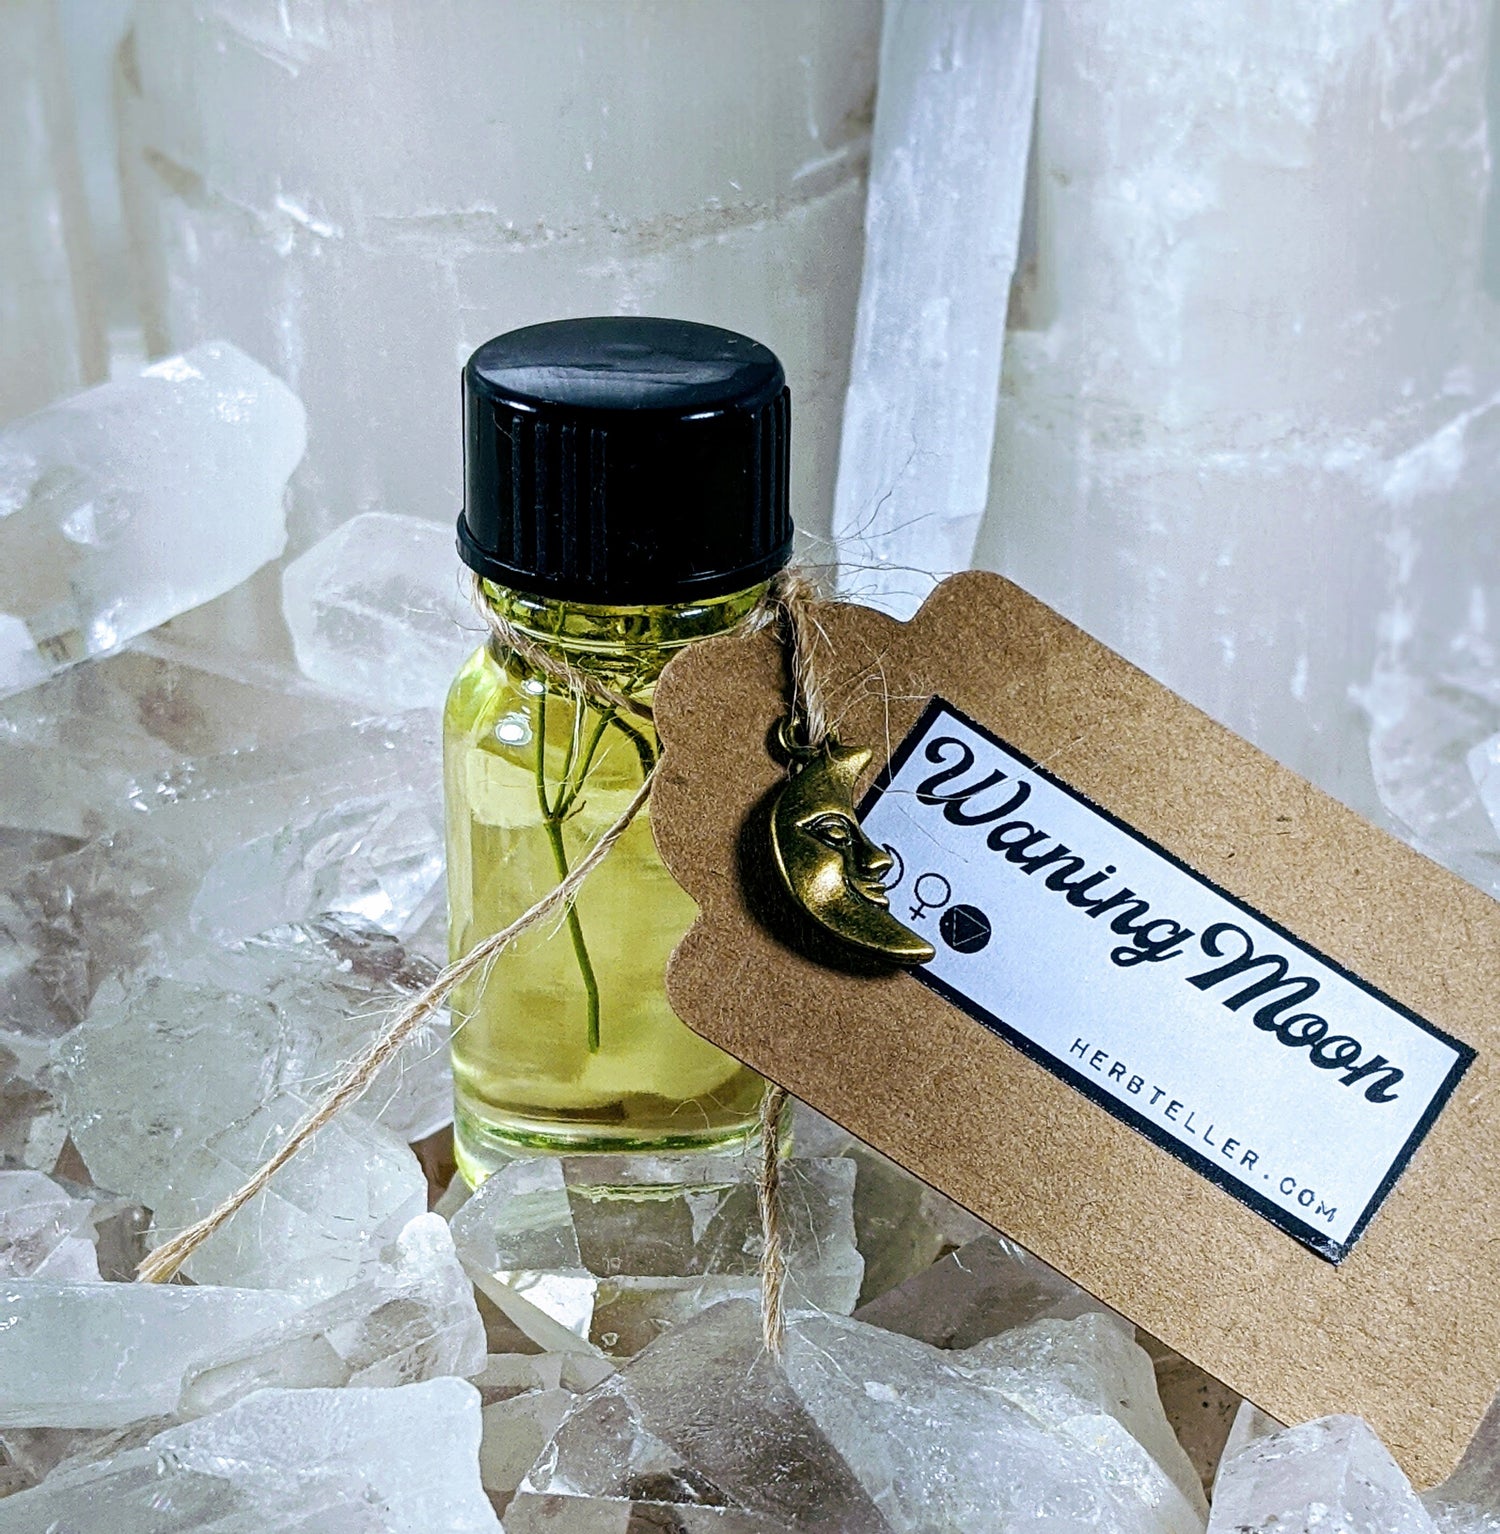 My Waning Moon Oil (Herbal Perfume/Oil) - Original City Apothecary